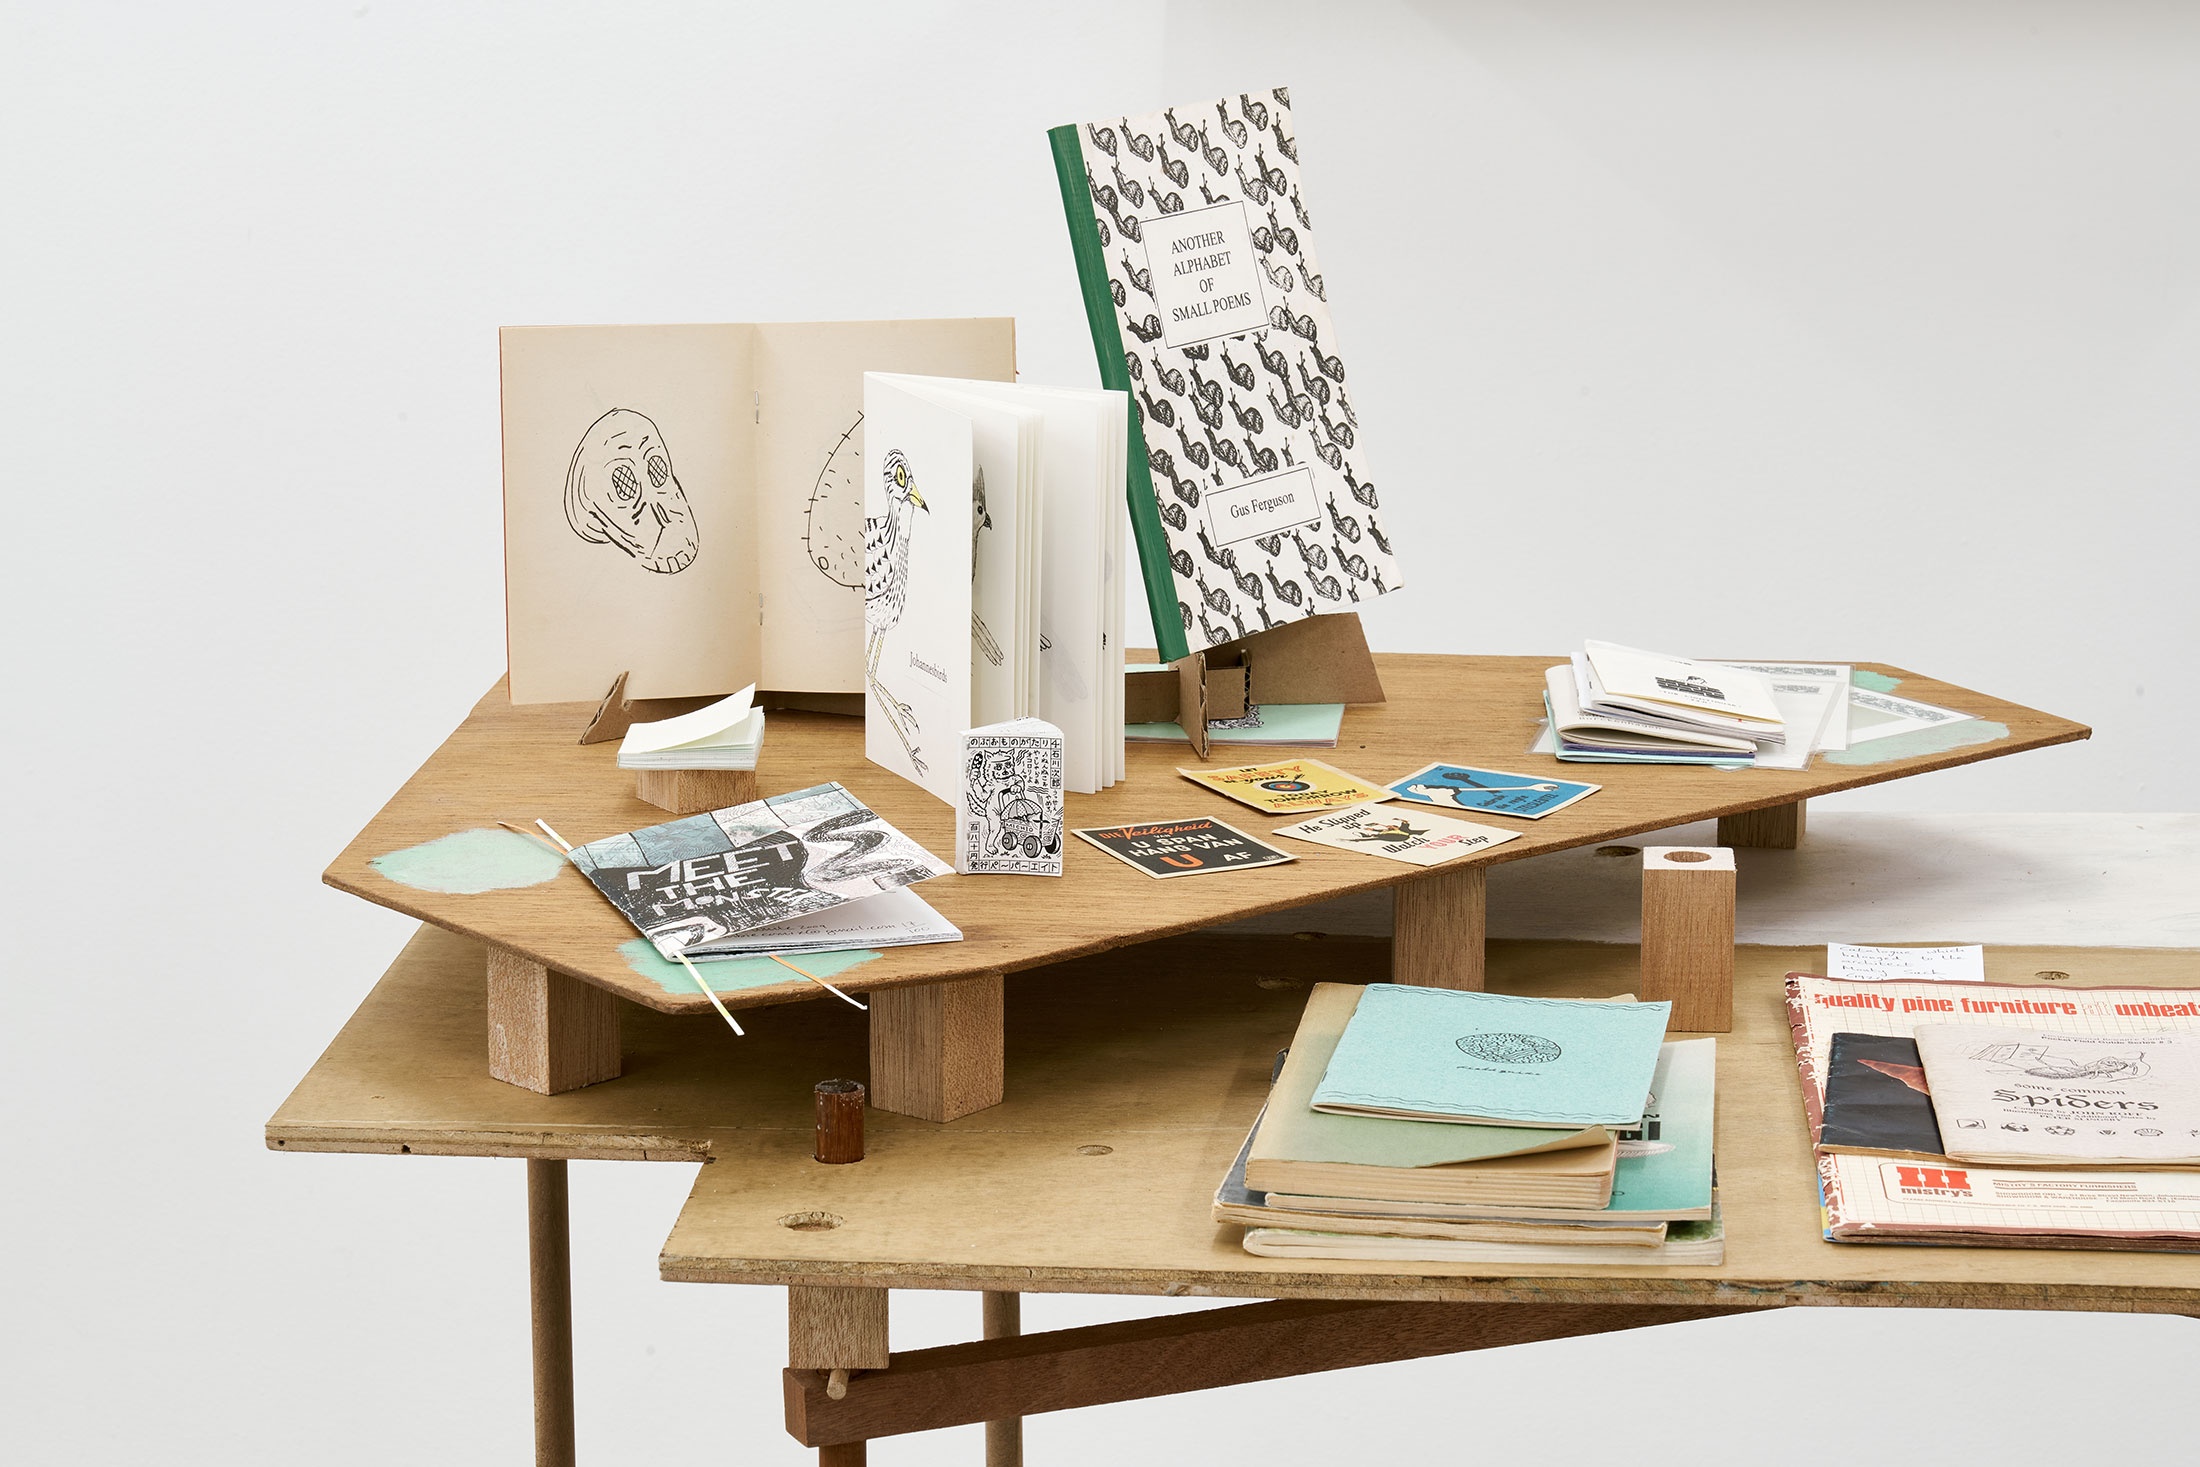 Installation photograph from the Papertrails exhibition in A4’s Reading Room. Various forms of printed matter are arranged on a custom wooden display table.
